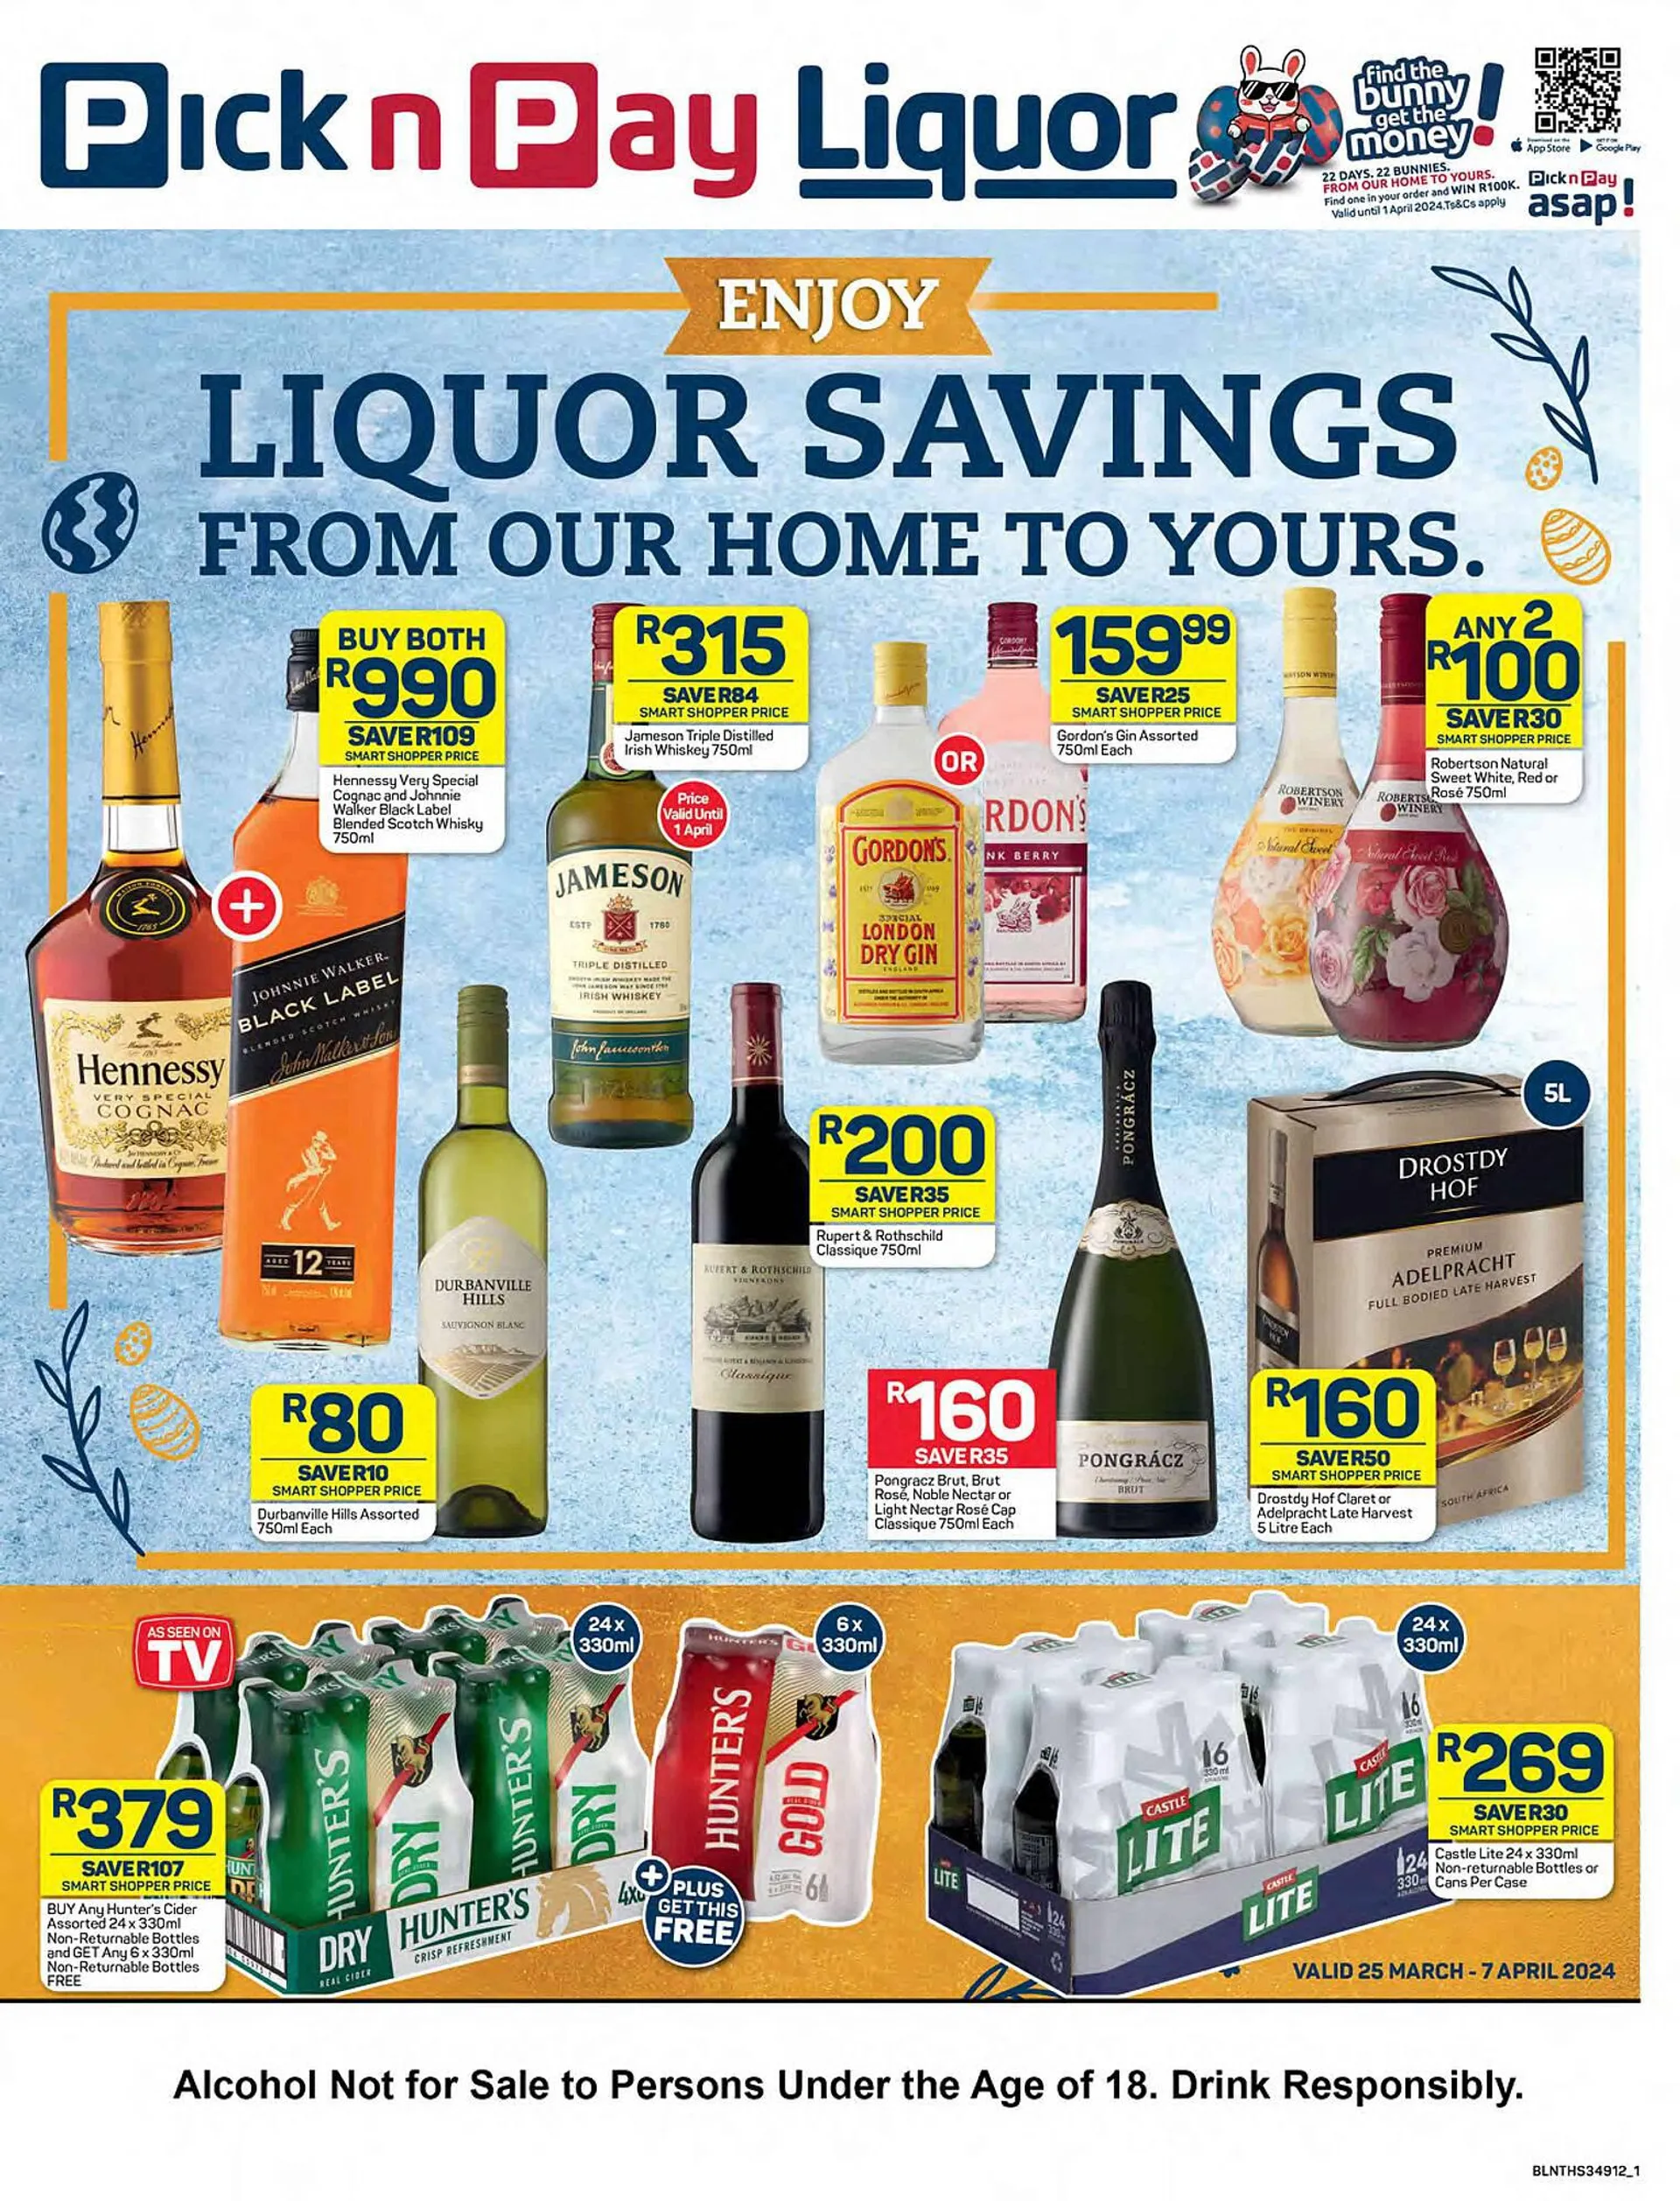 Pick n Pay catalogue - 25 March 7 April 2024 - Page 1